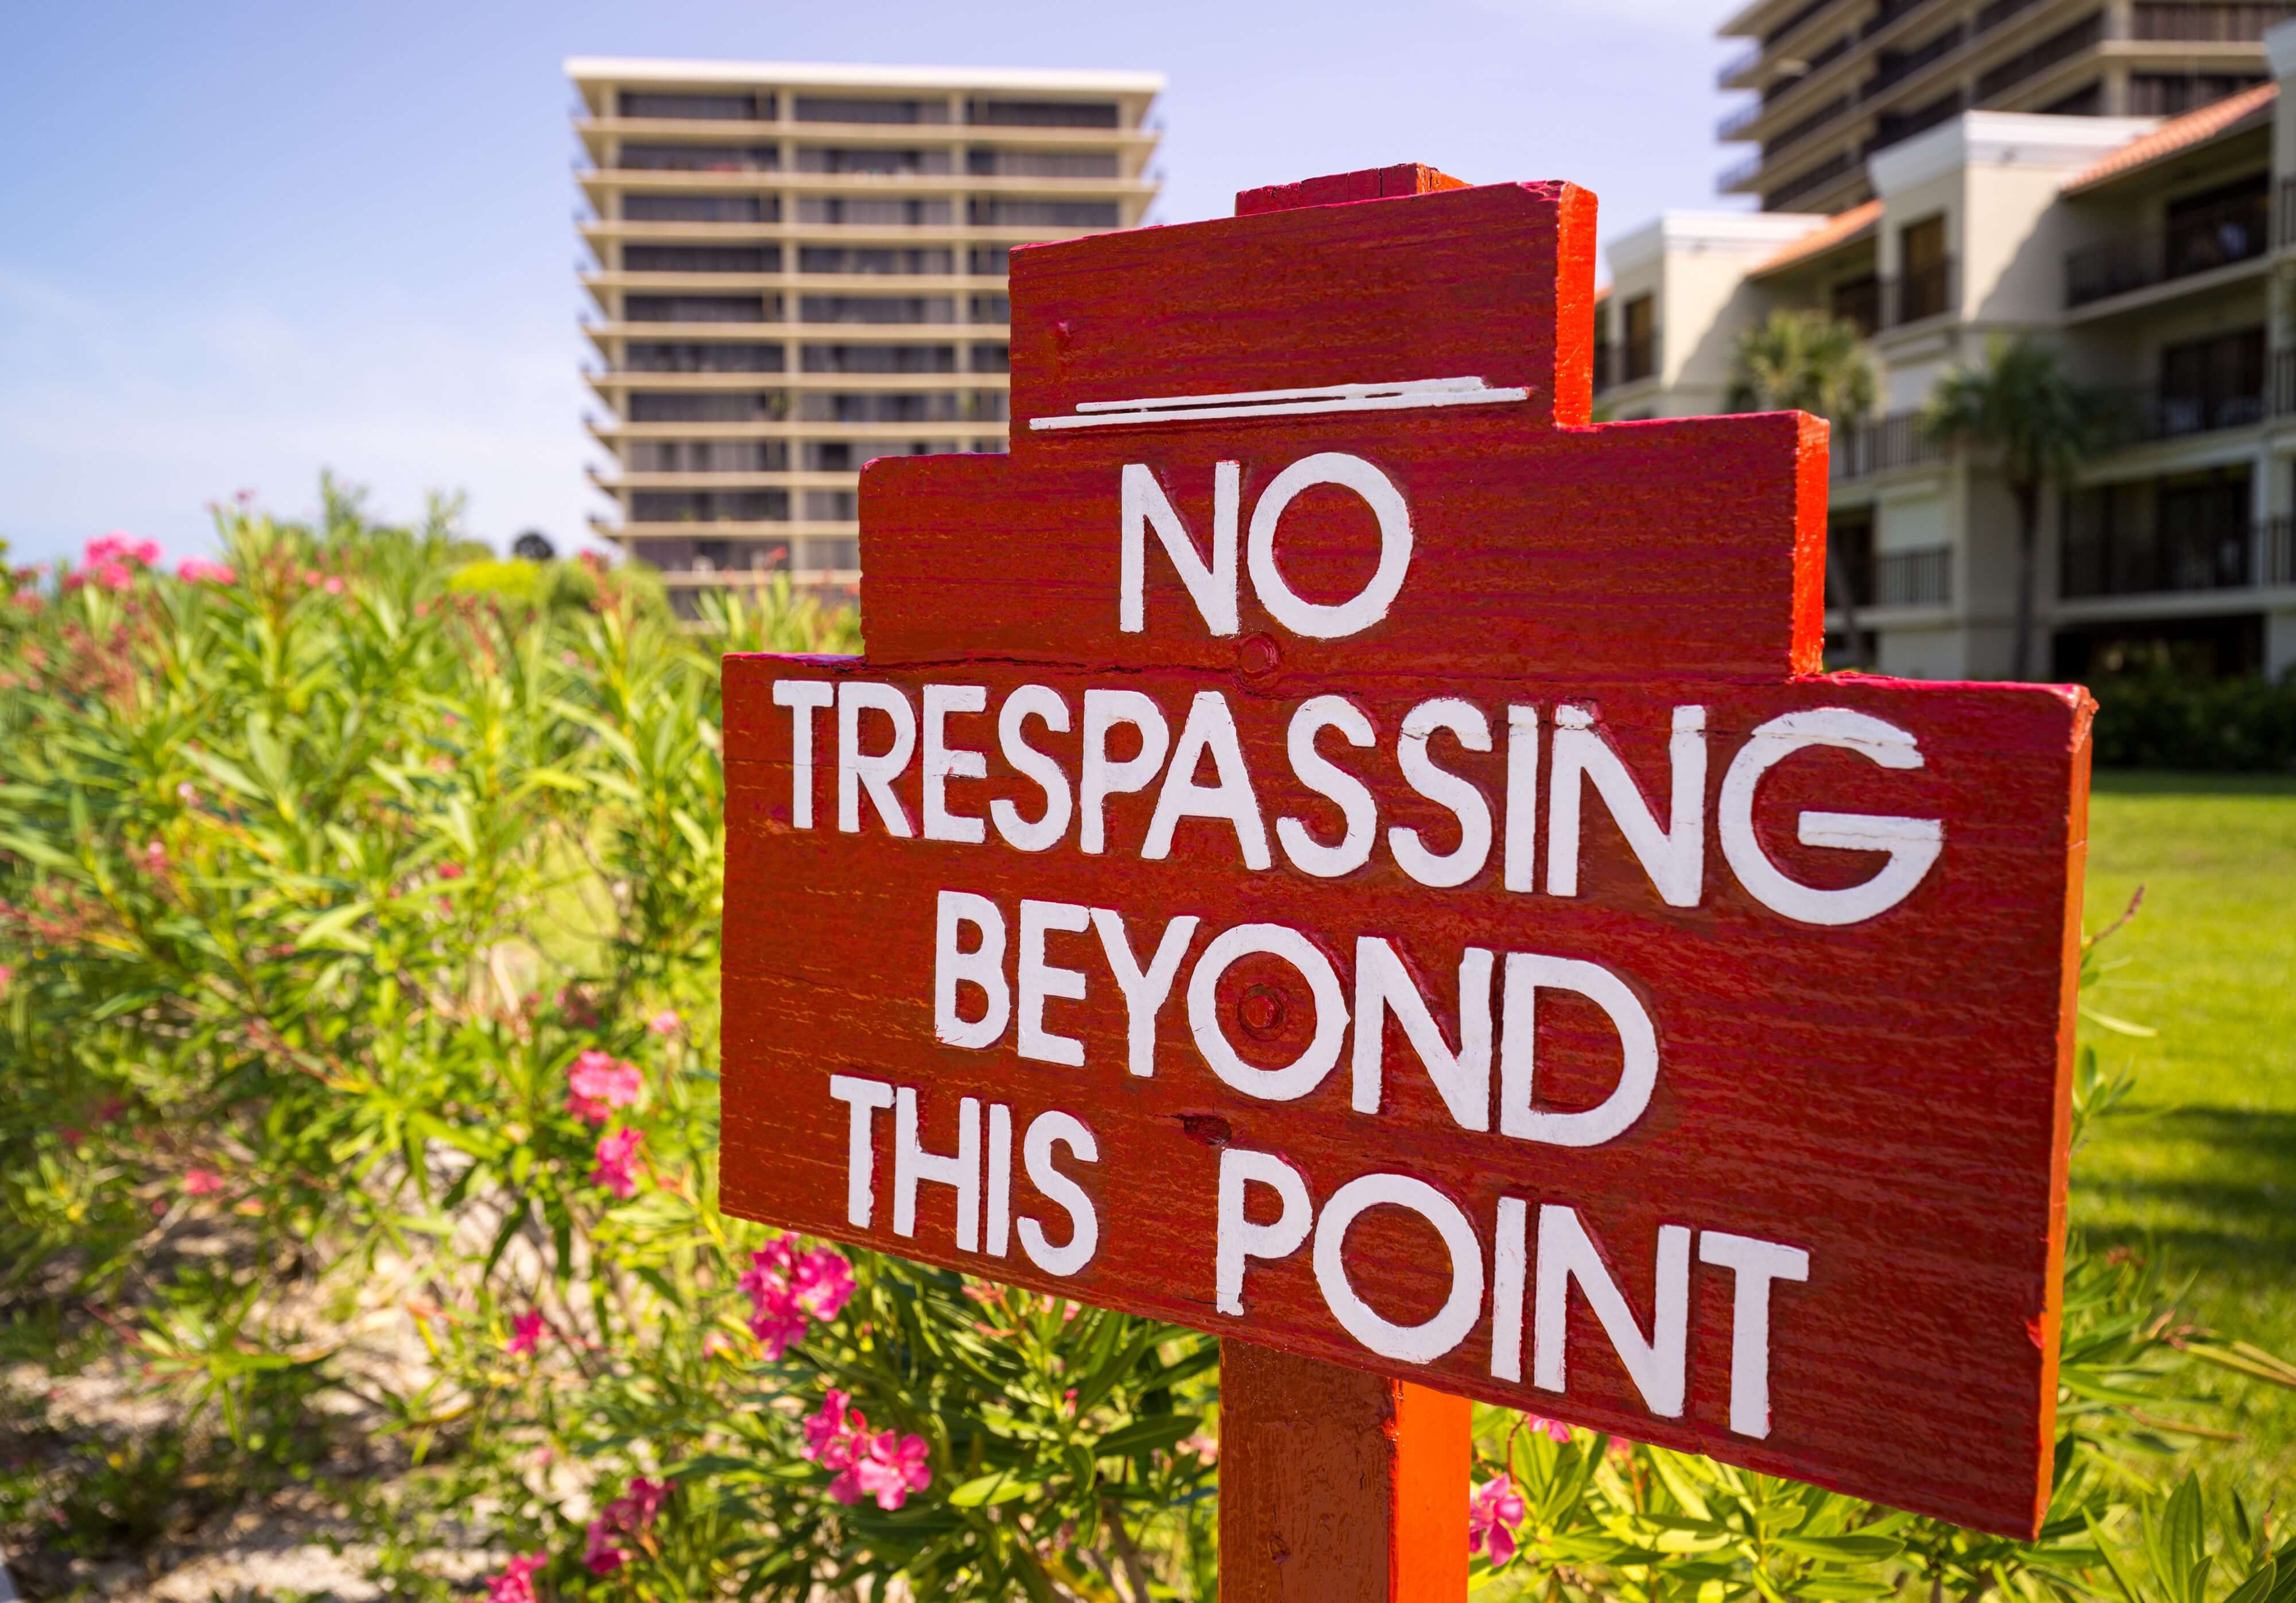 Red sign with white print on grass in front of tall buildings “no trespassing beyond this point